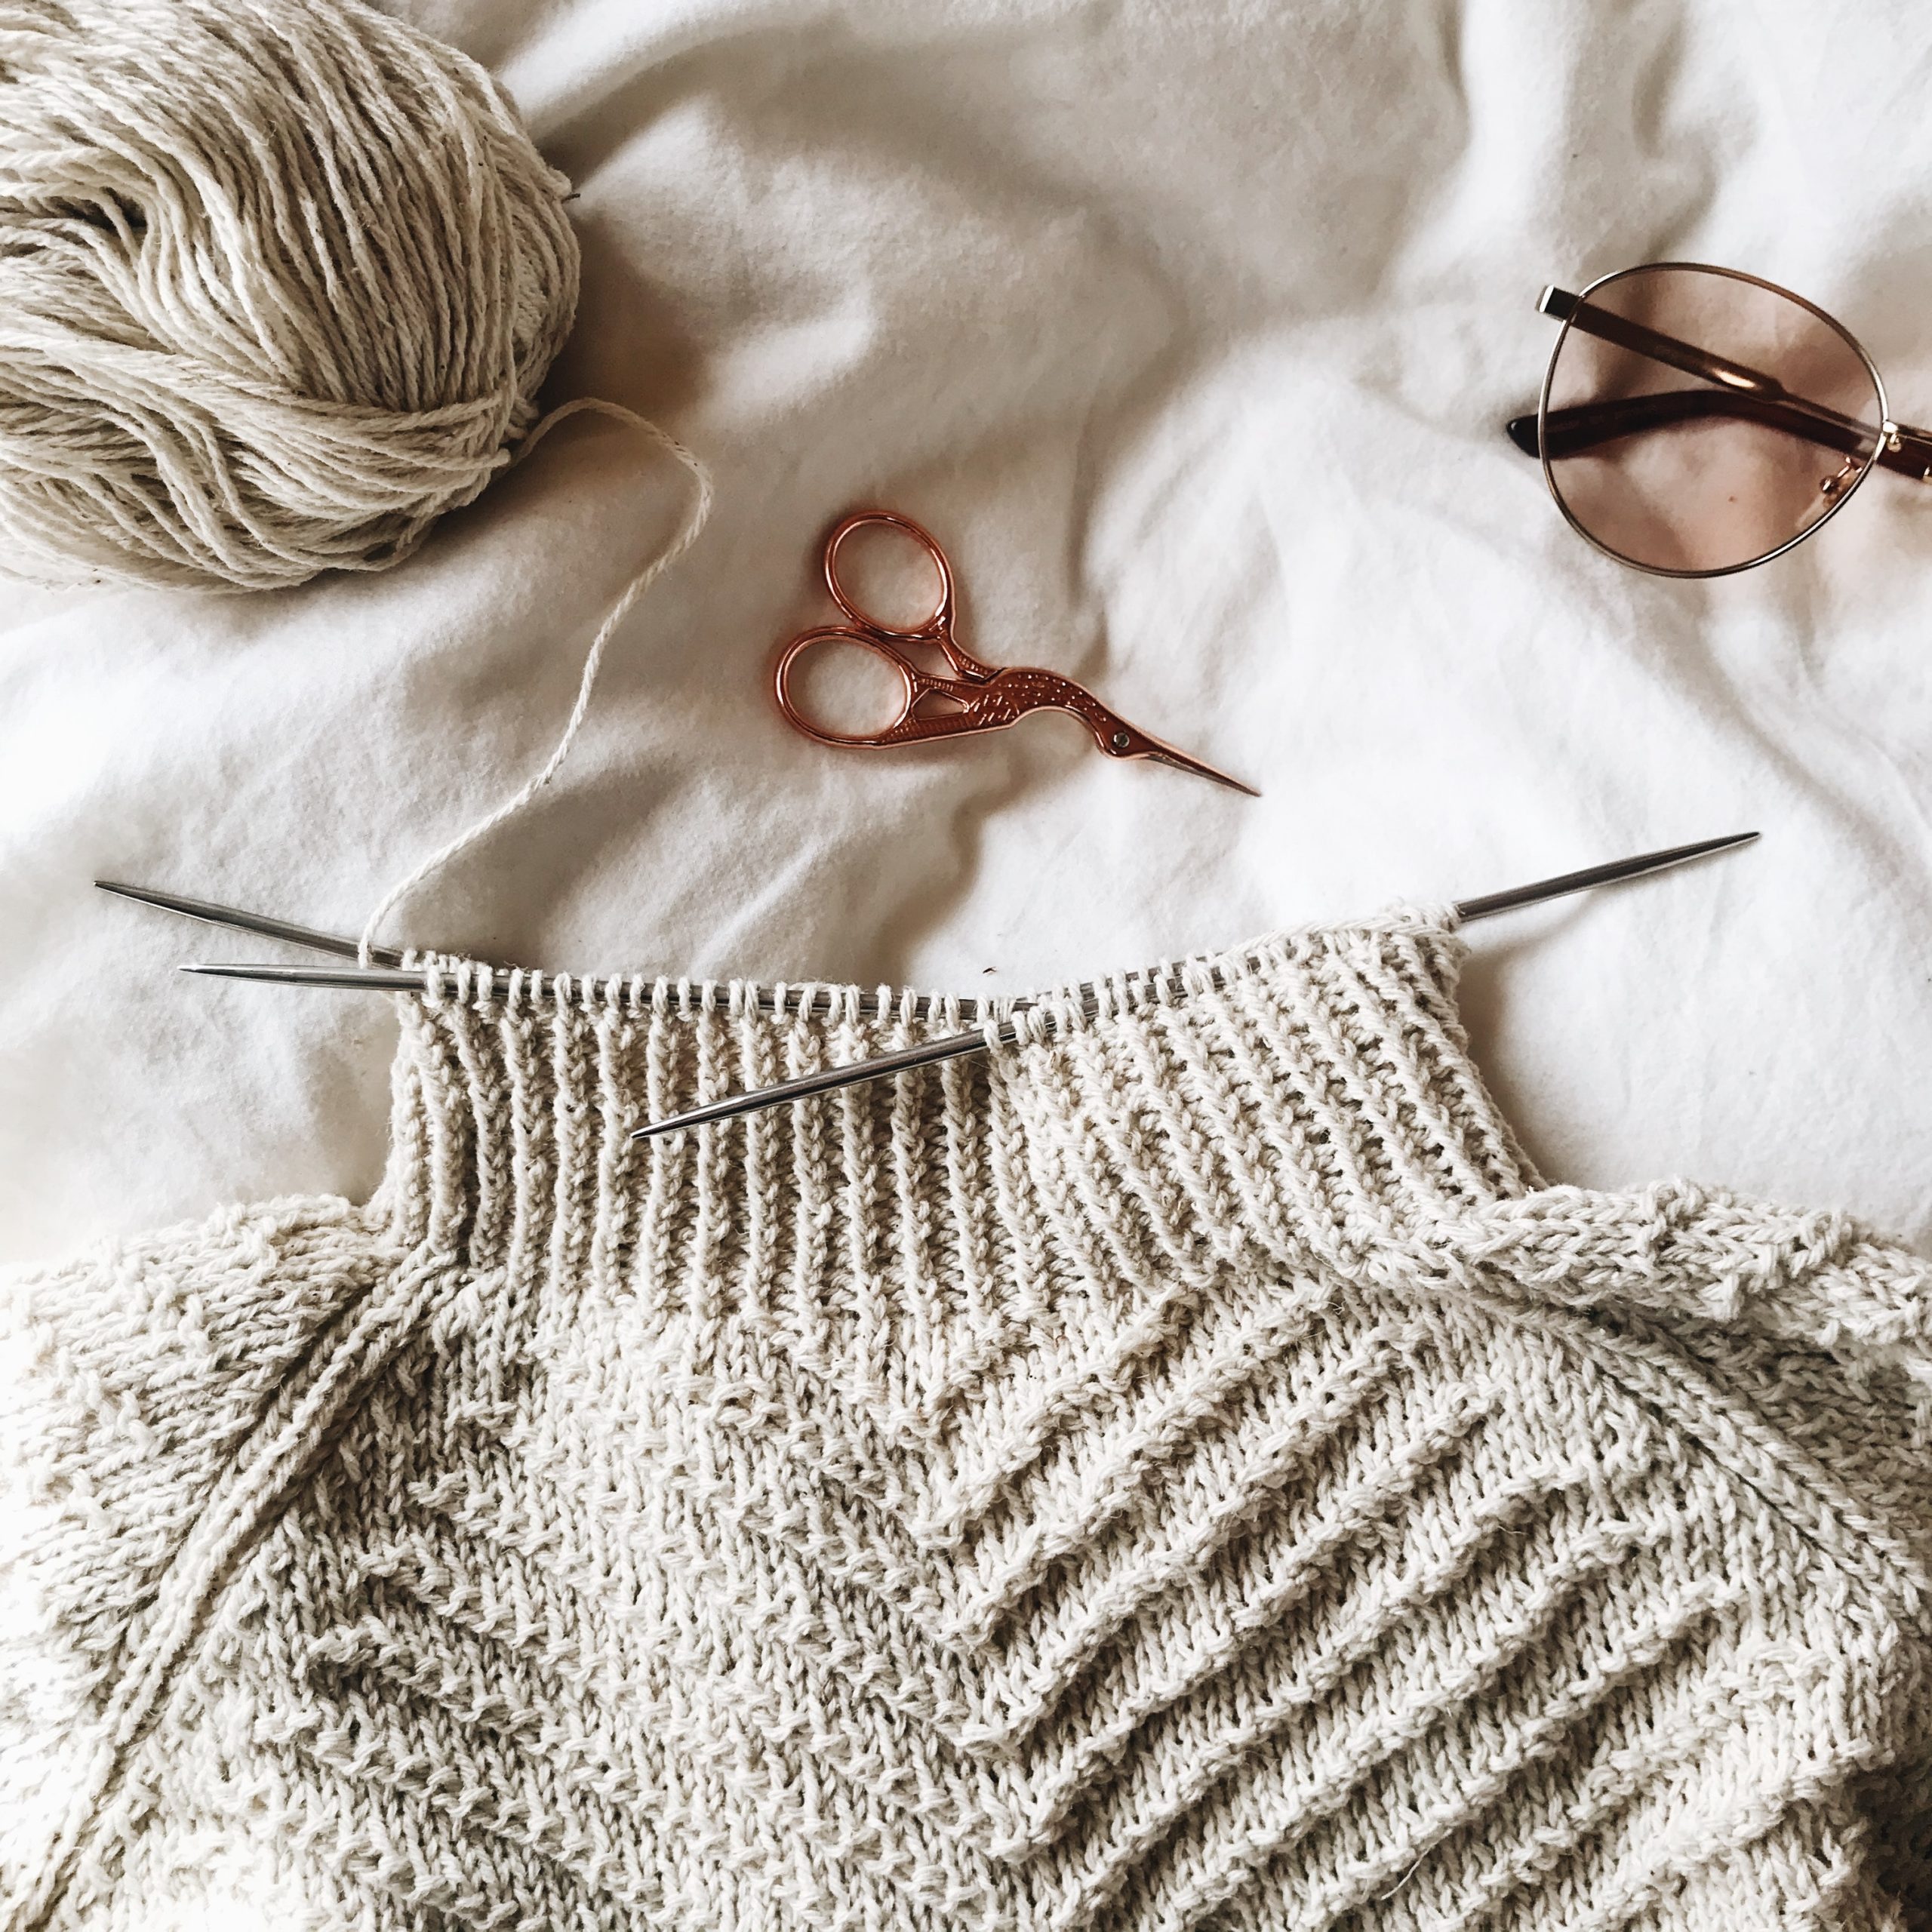 Discover the 10 Must-Have Knitting and Crochet Tools That Will